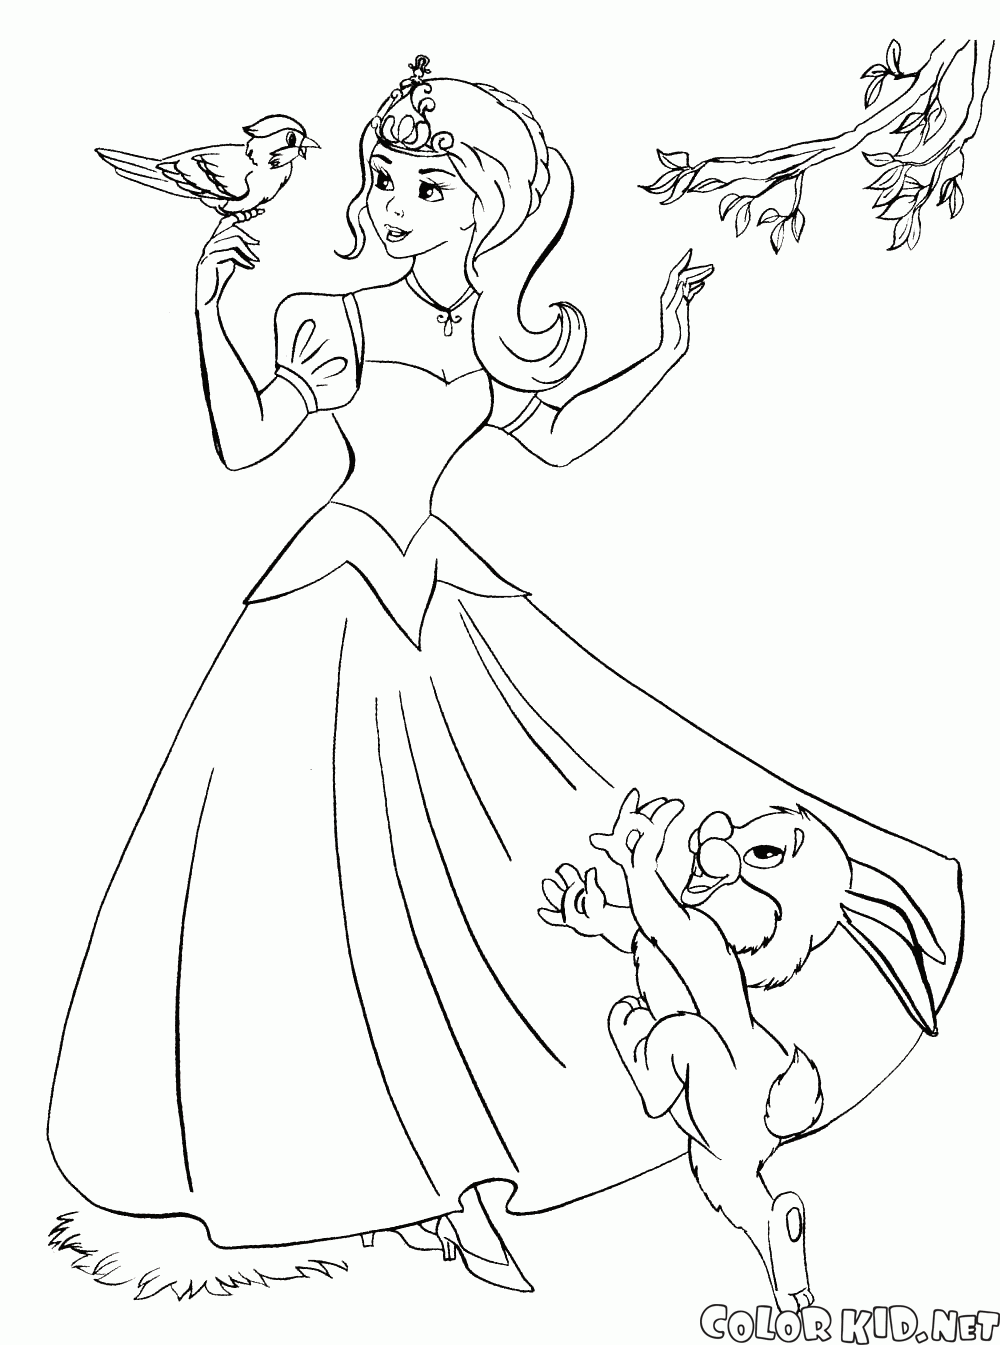 The Princess and the good animals